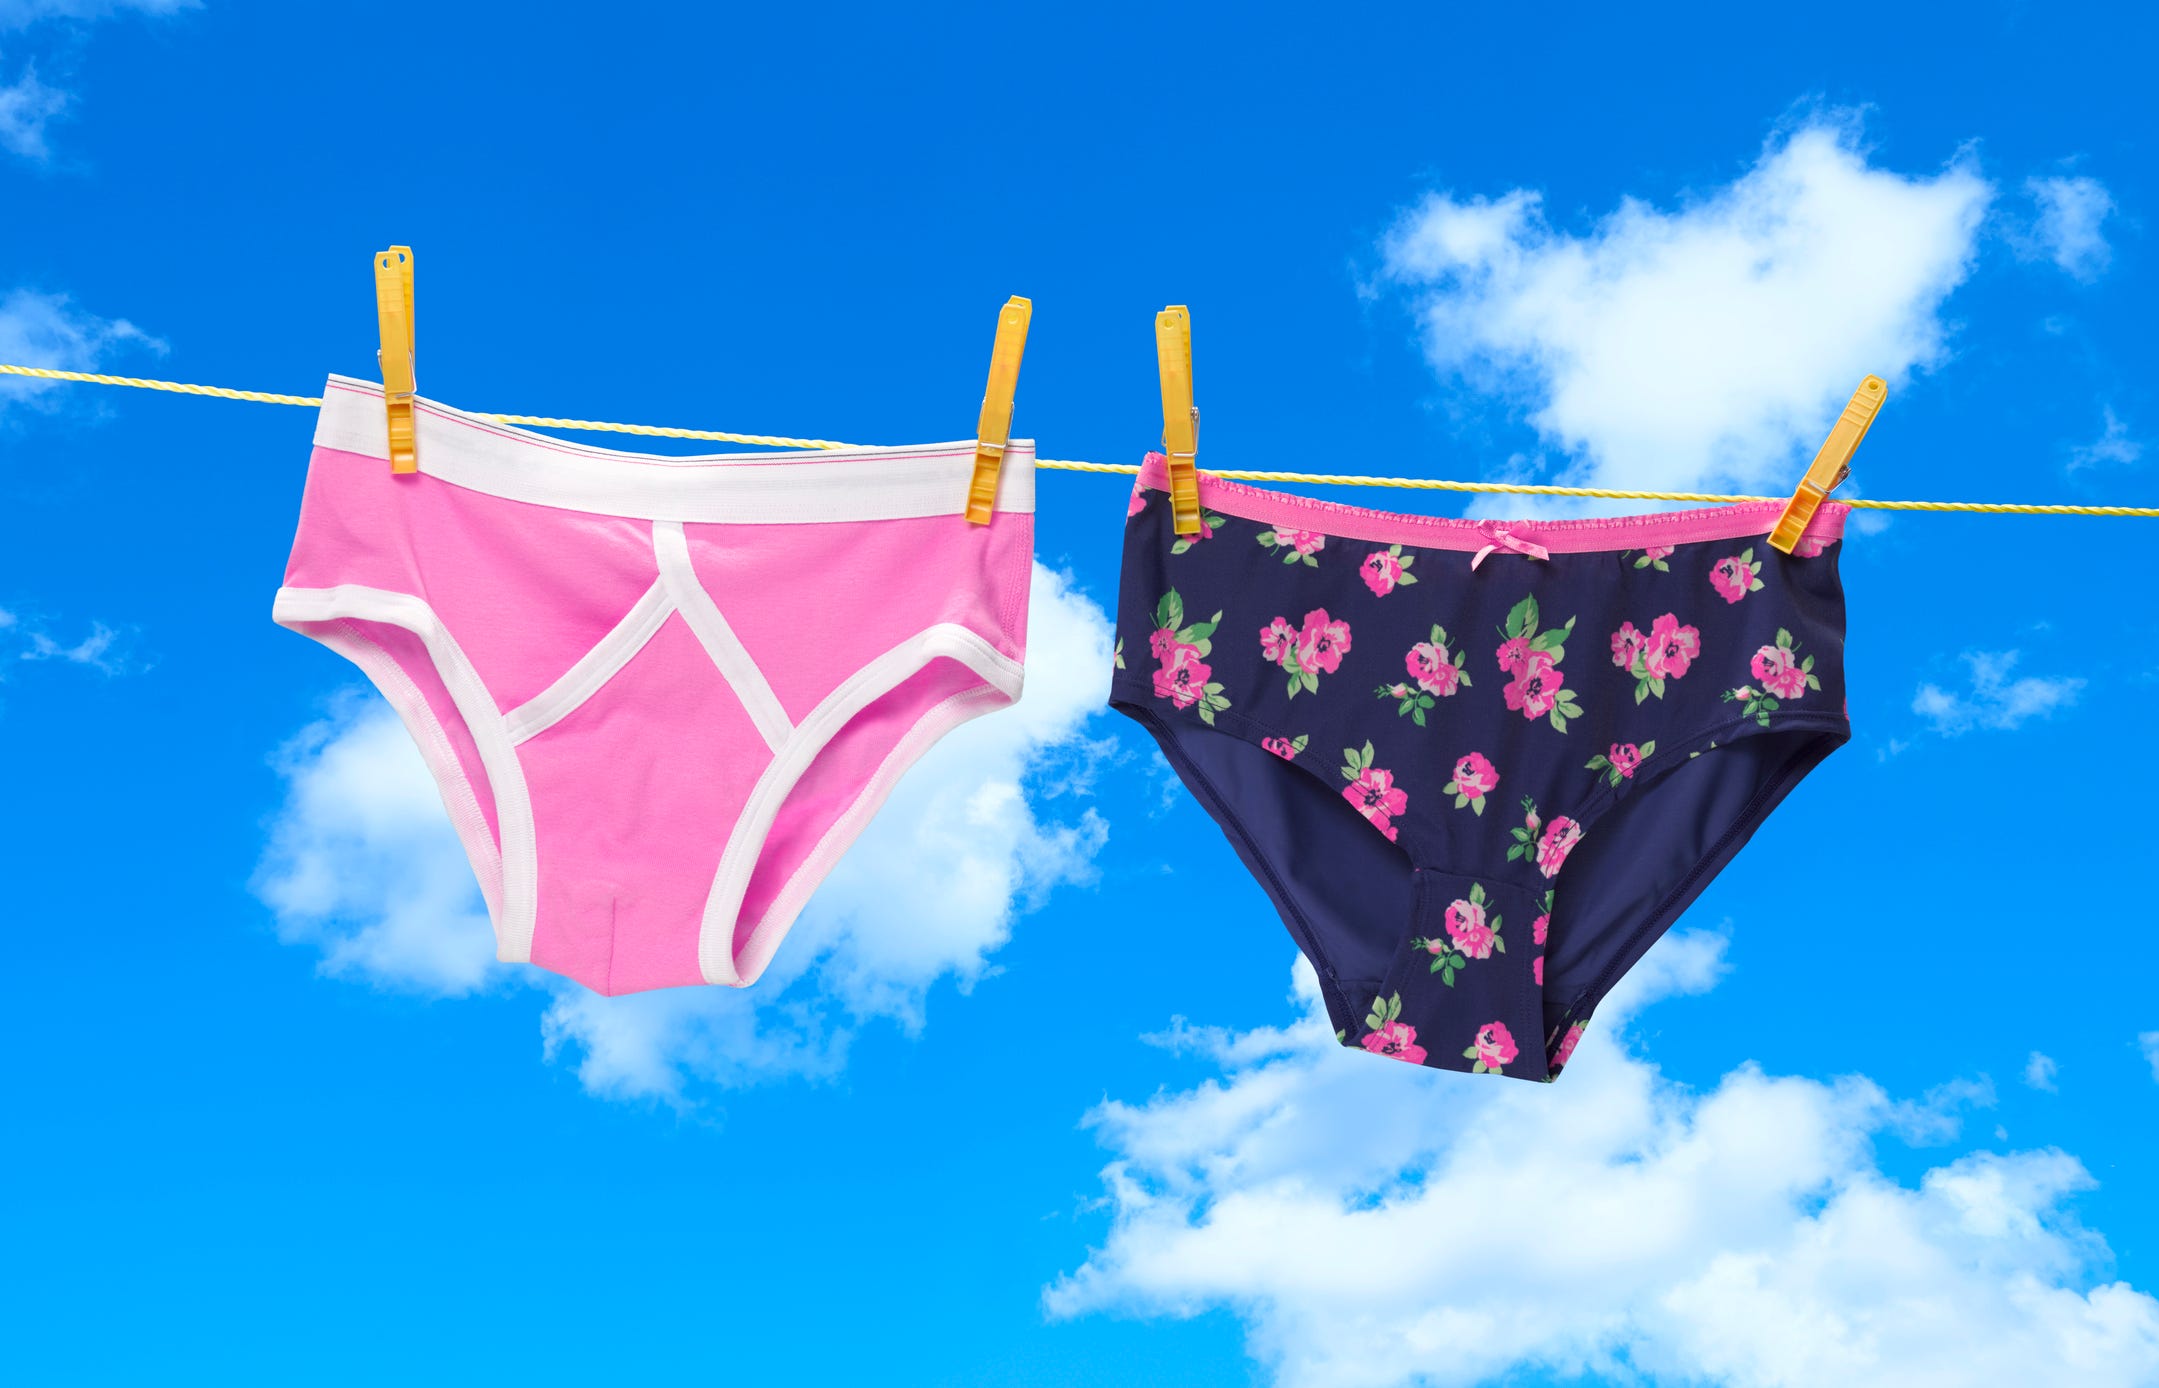 Why do we get bleach stains in our underwear?